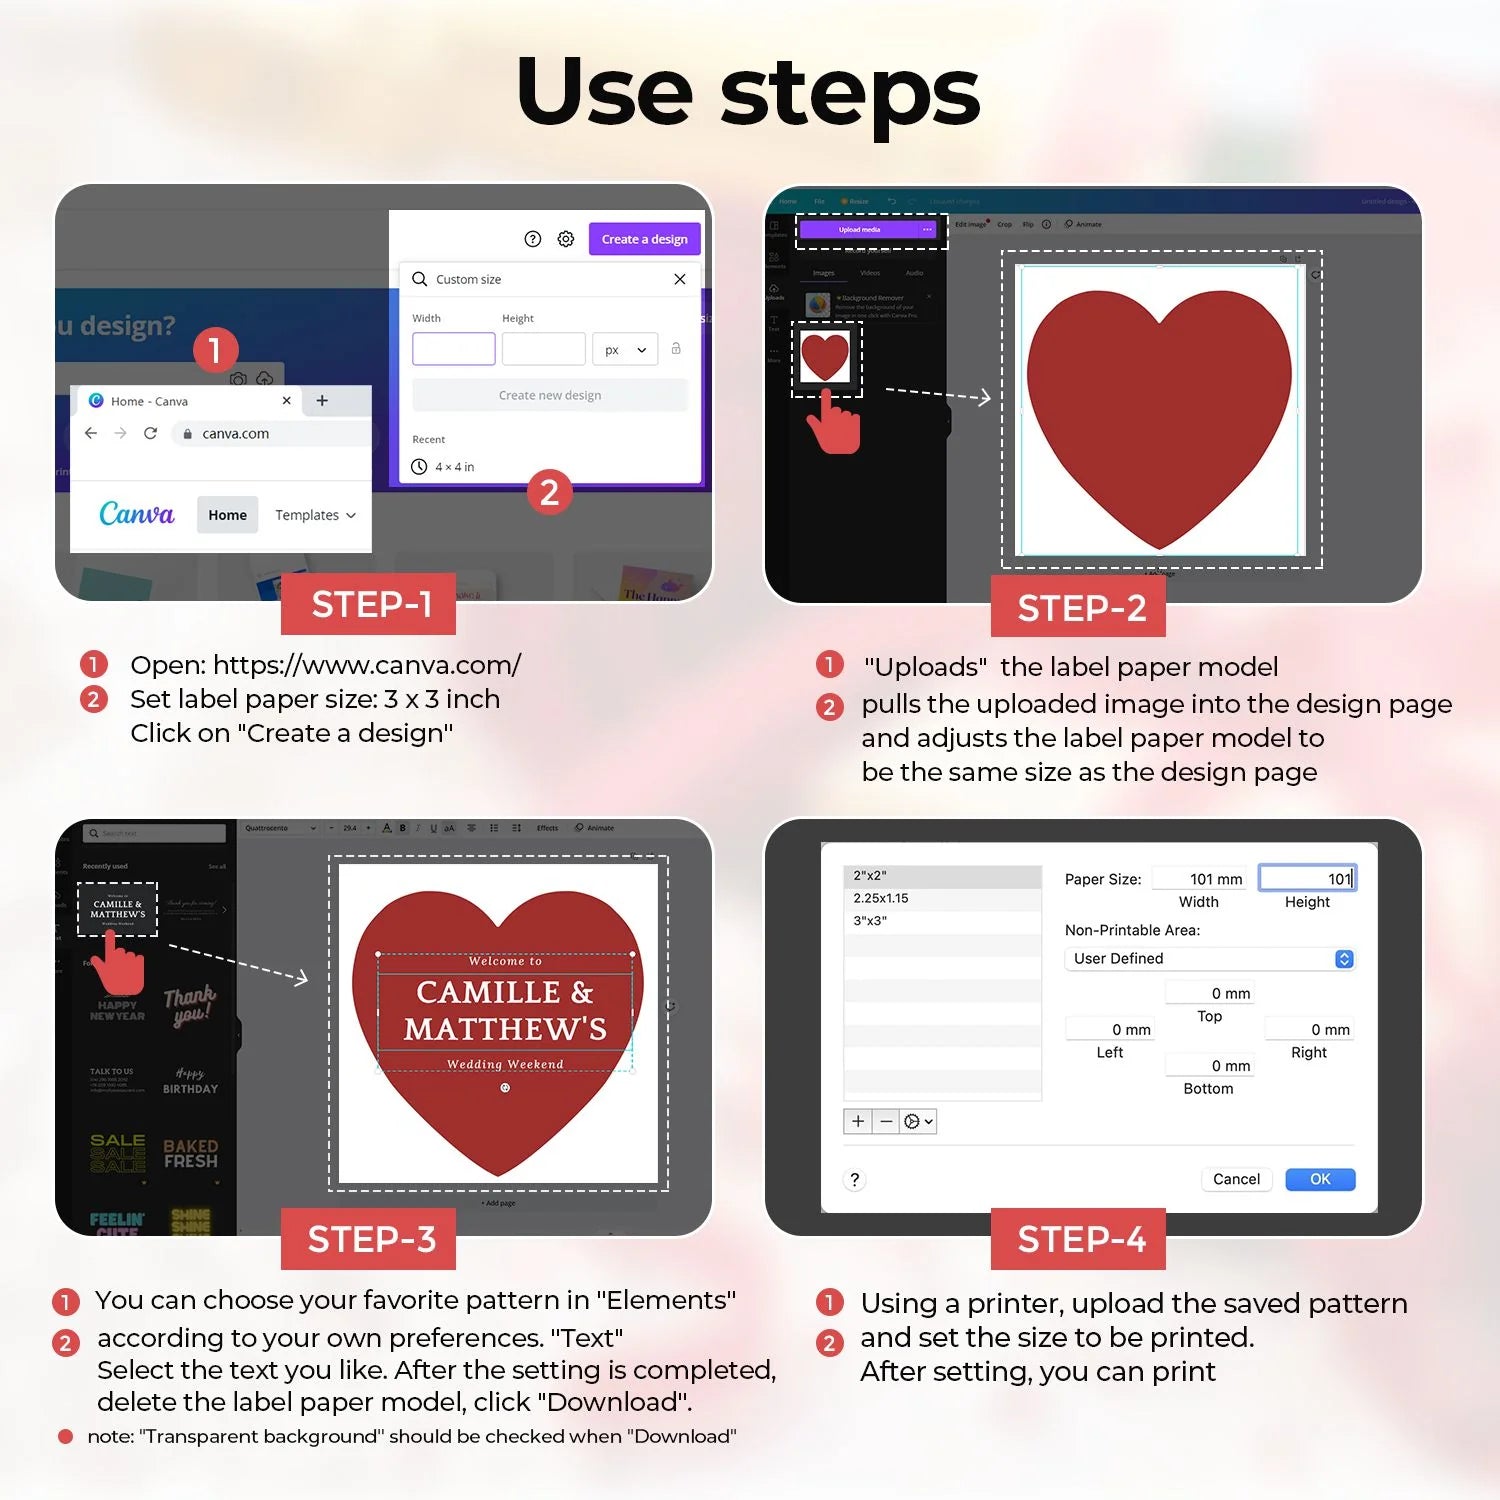 Steps for printing heart-shaped labels.